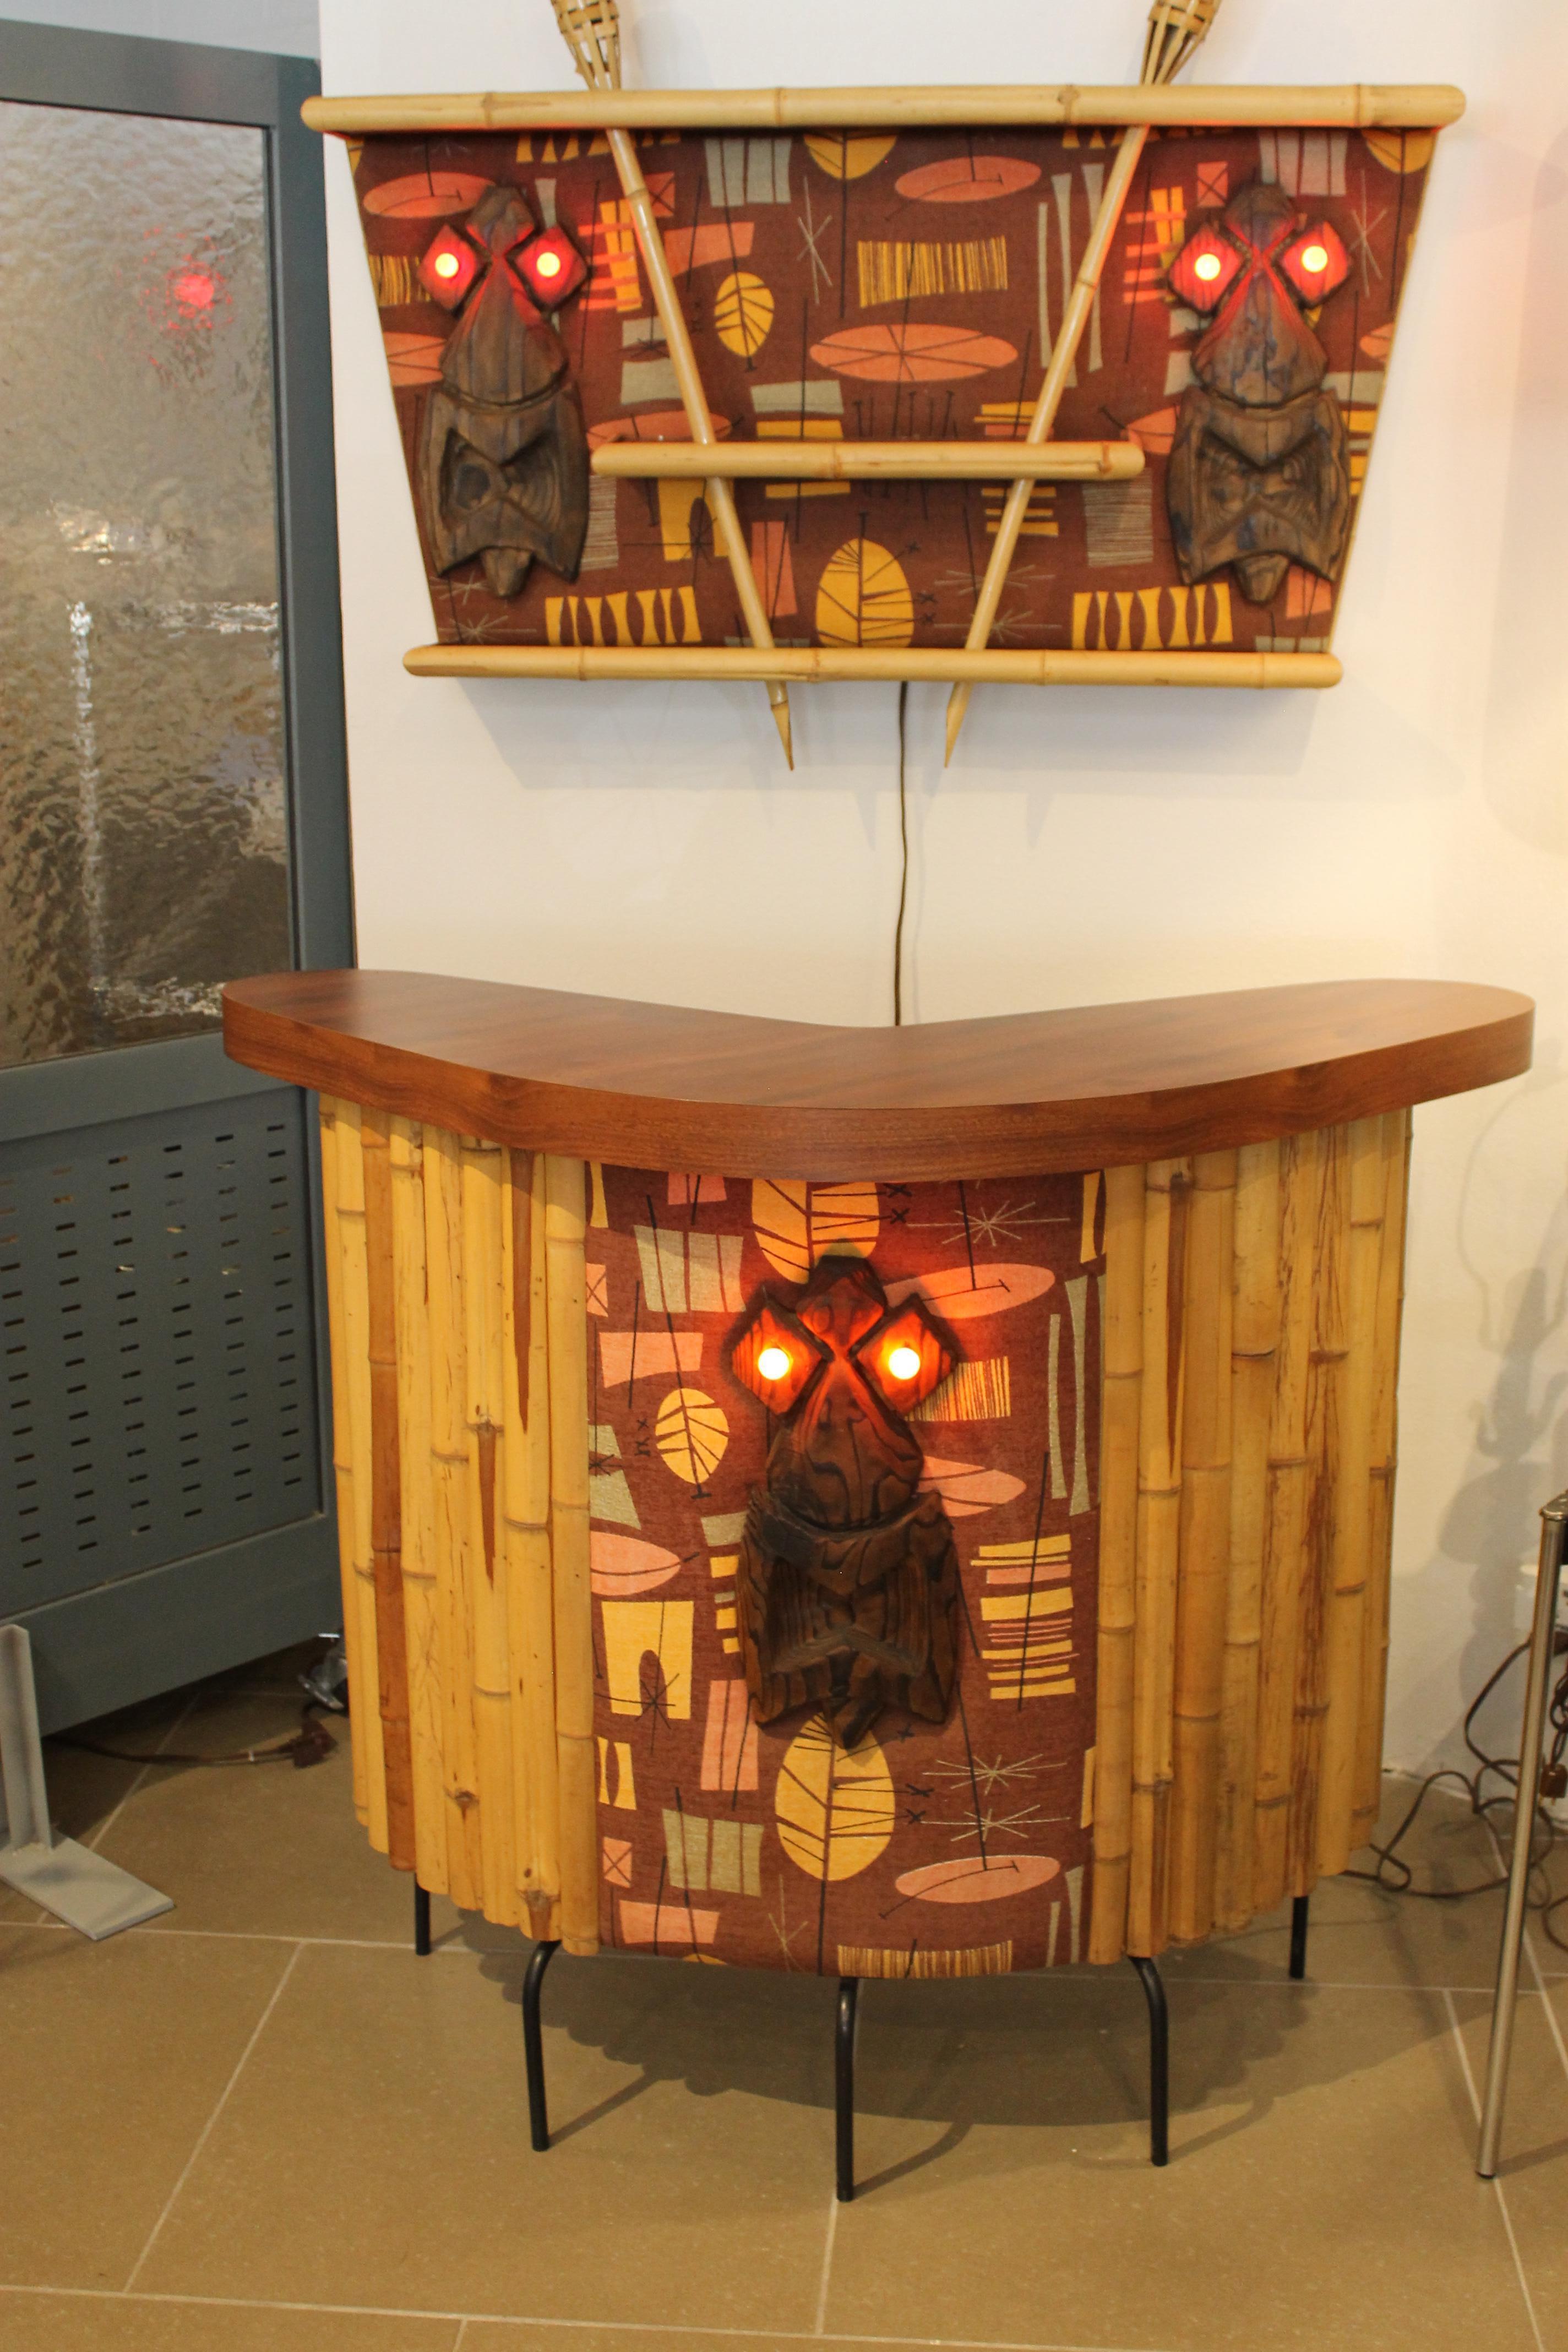 One of a kind studio made tiki bar with back bar and a pair of stools. Wood masks were created by Tiki Bosko Hrnjak about 20 years ago.   Bosko and his work have been featured in numerous books, newspaper and magazine articles.  Contains vintage